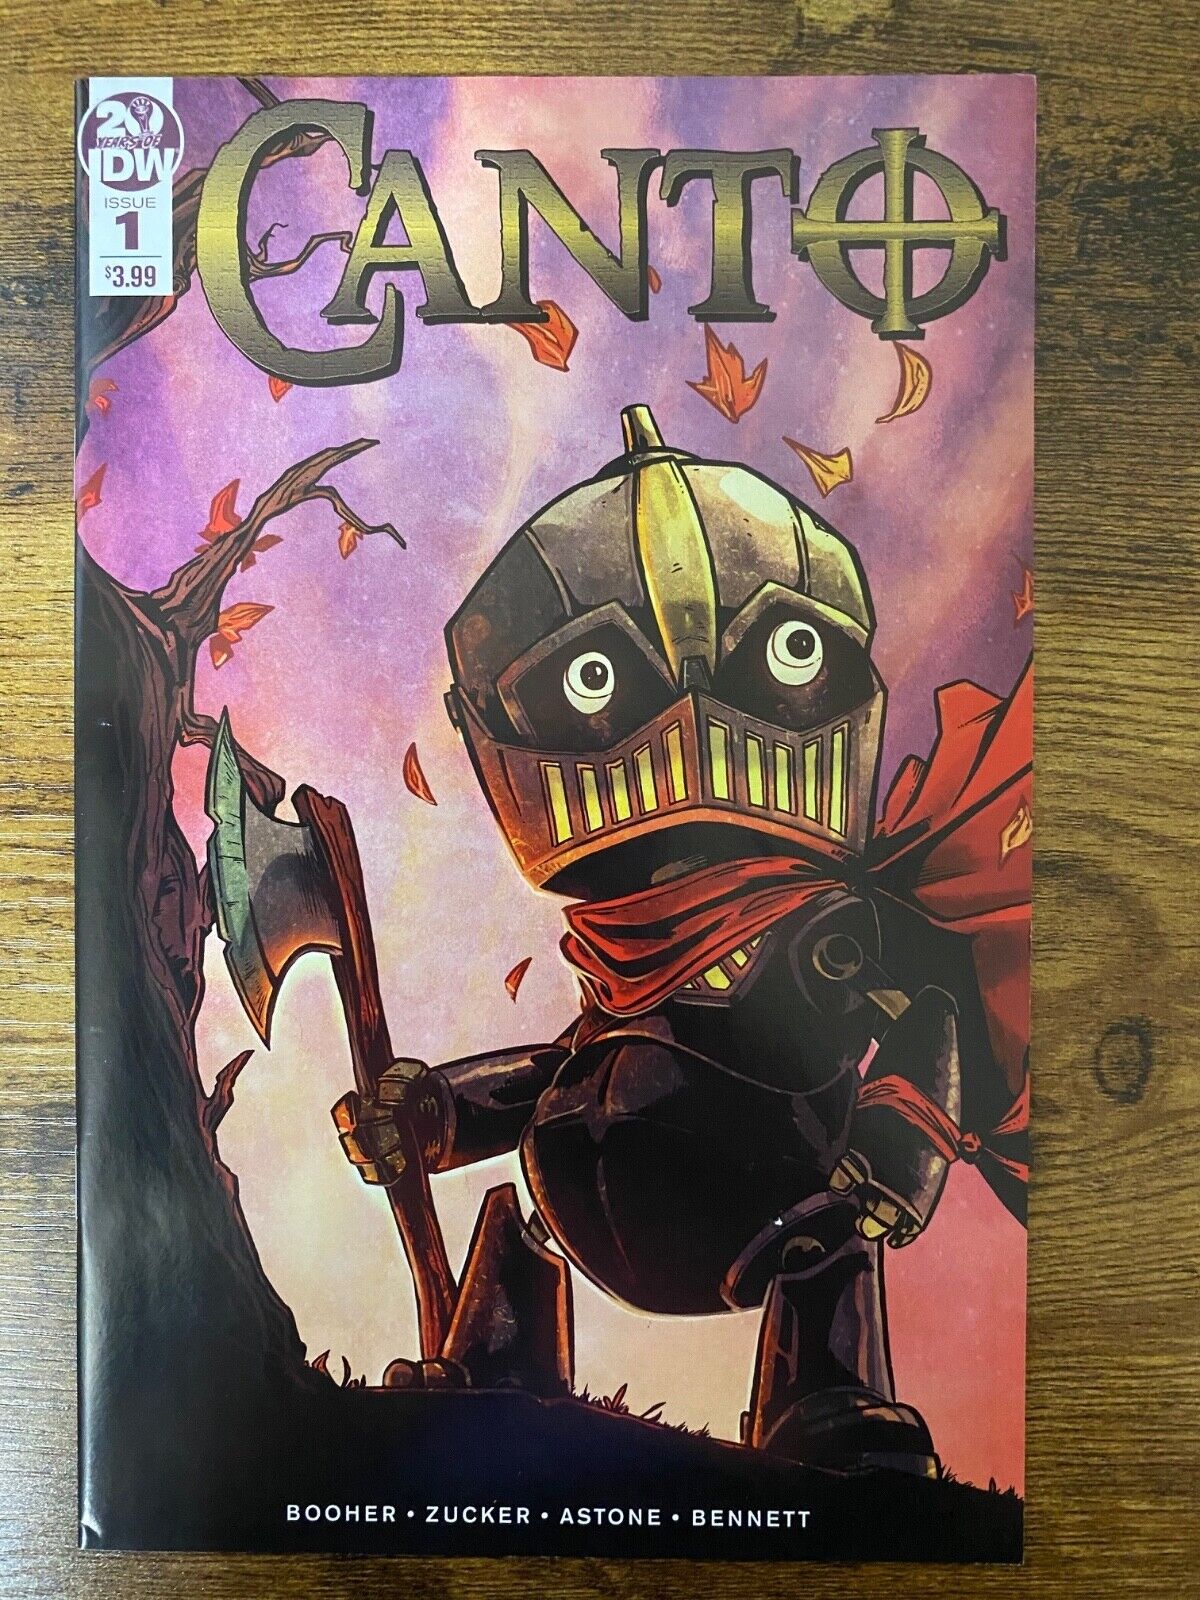 Canto 1 1st Print IDW 2019 NON-WRINKLED/WAVY Cover Hard To Find HIGH GRADE